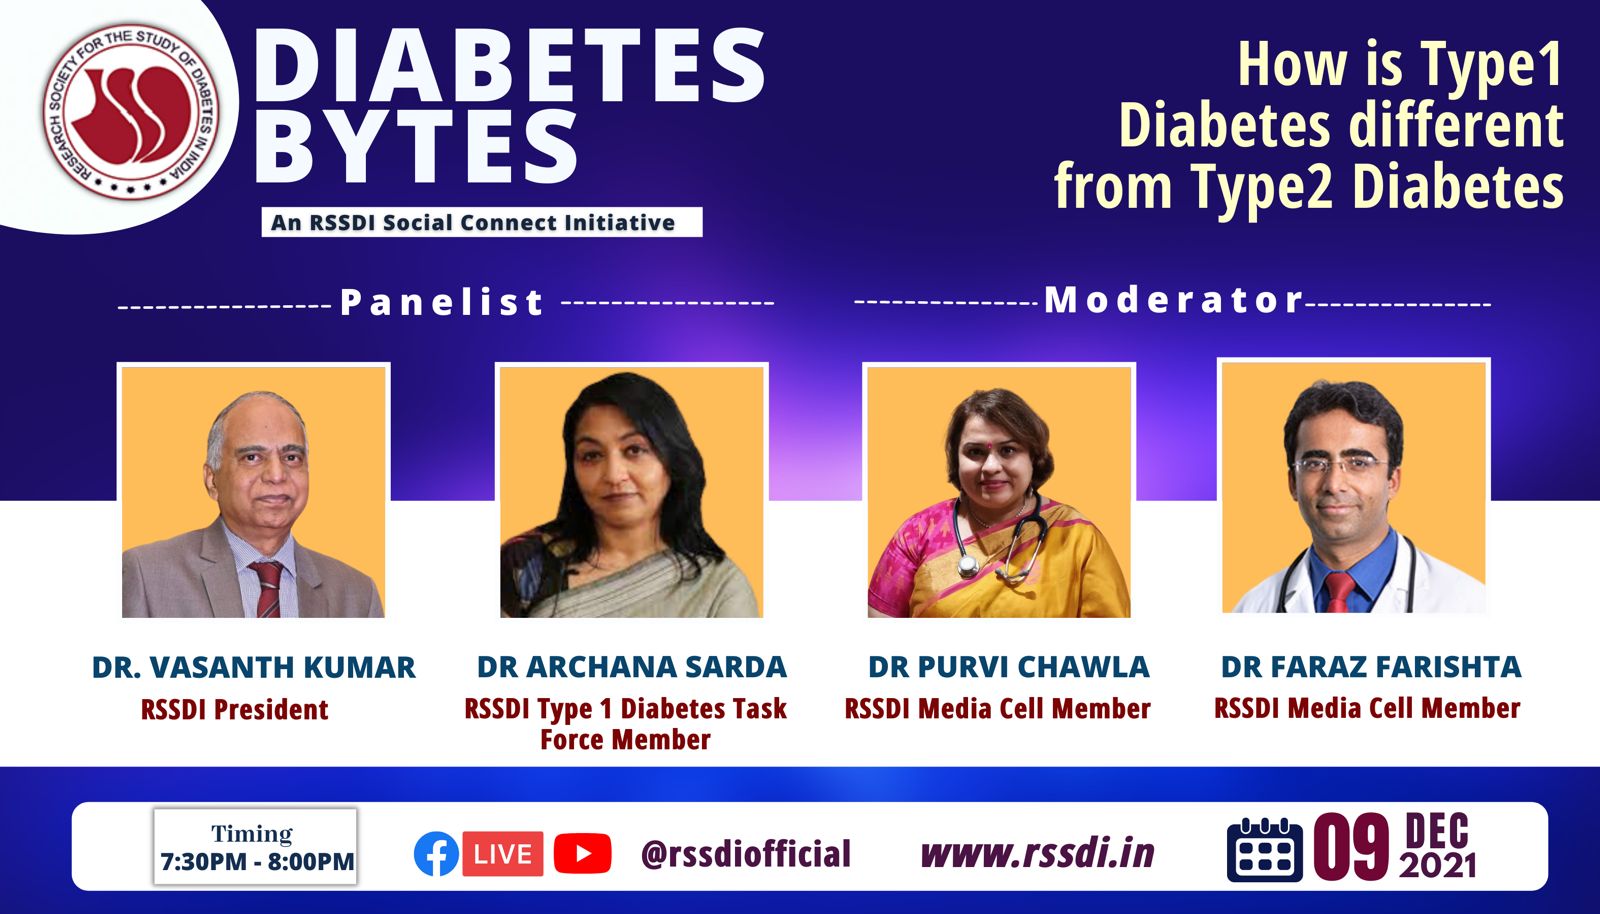 How is Type 1 Diabetes different from Type 2 Diabetes